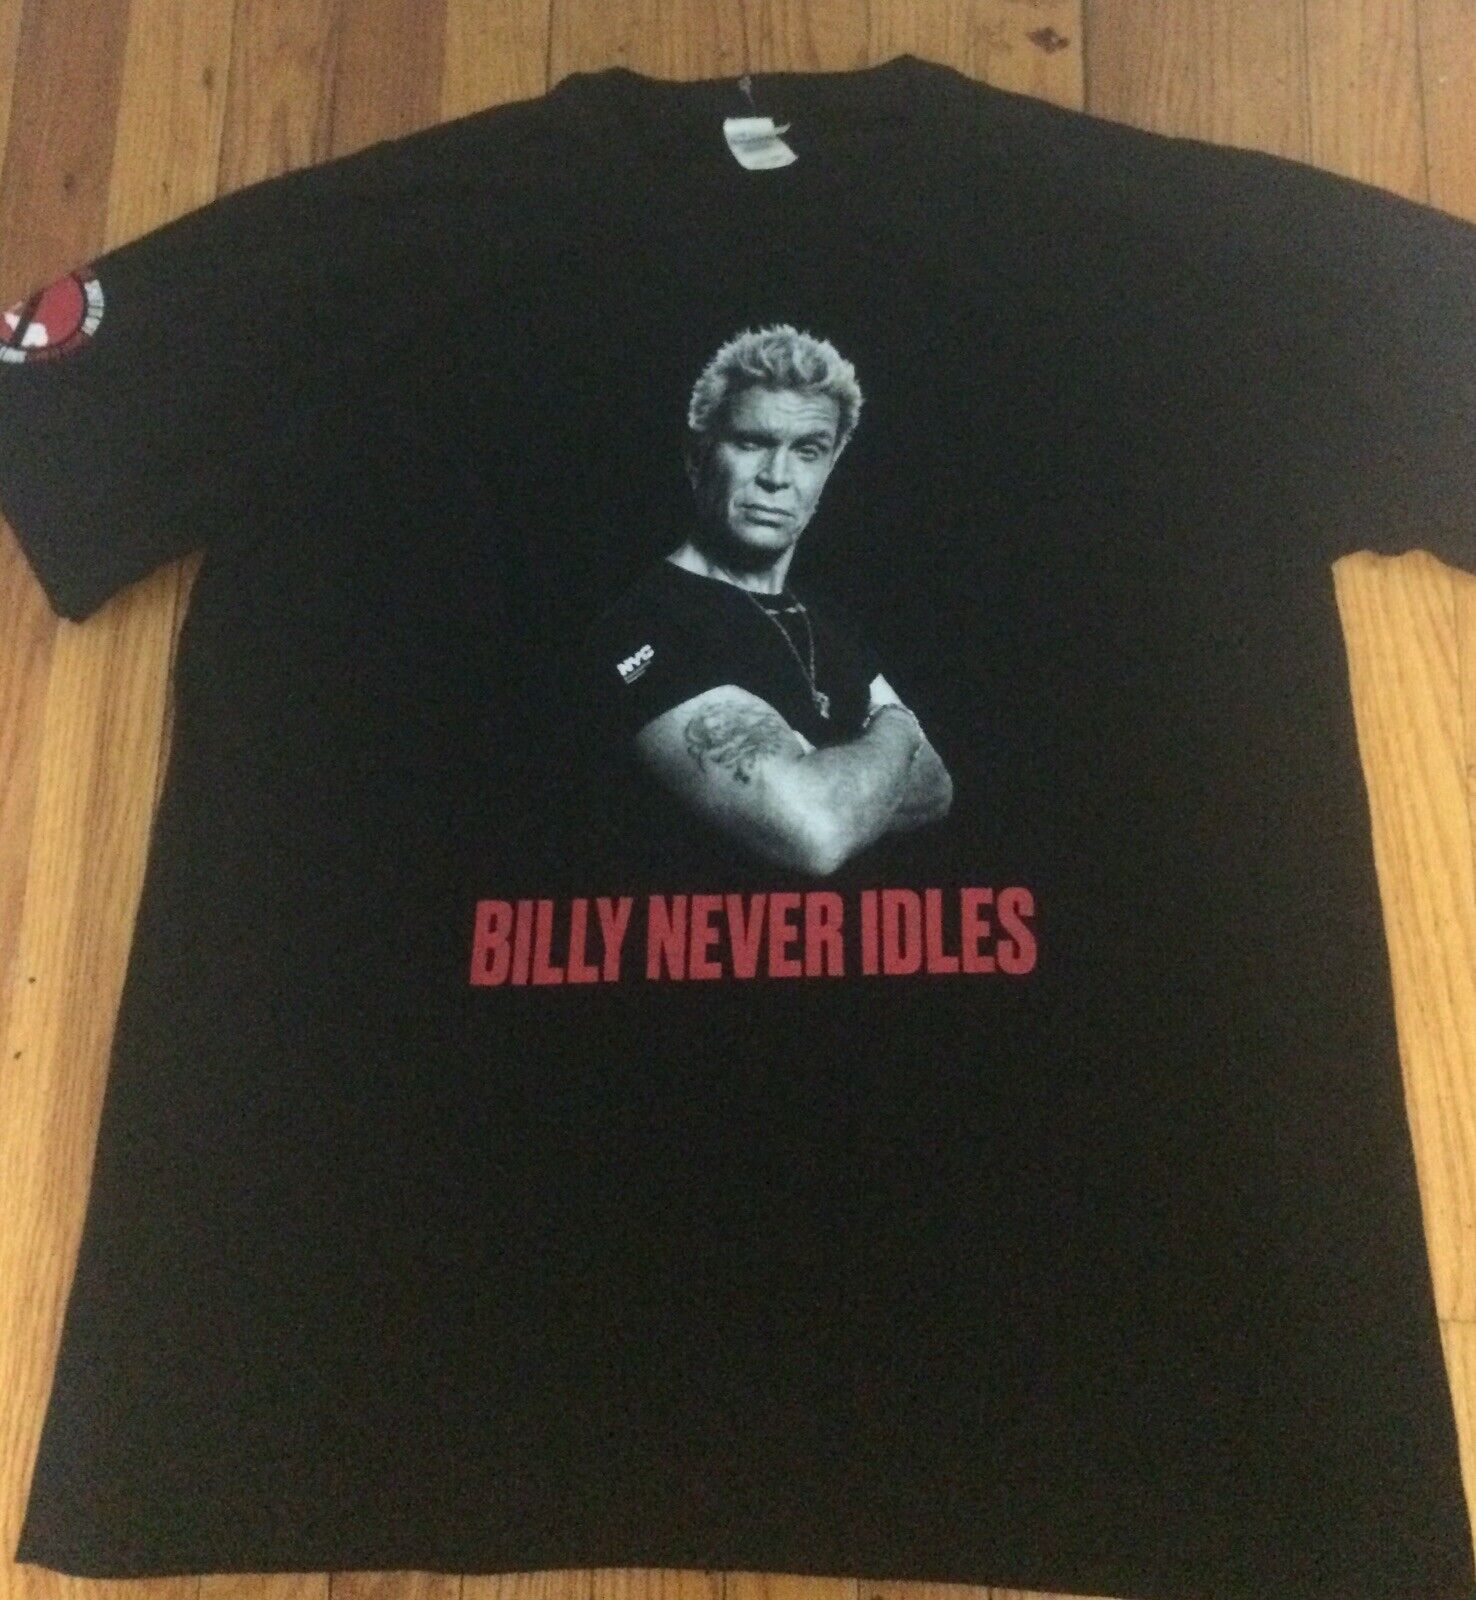 Uden for desillusion Modernisere Billy Never Idles Idol NYC Concert Tour Shirt XL Environment New York Rock  NY | eBay